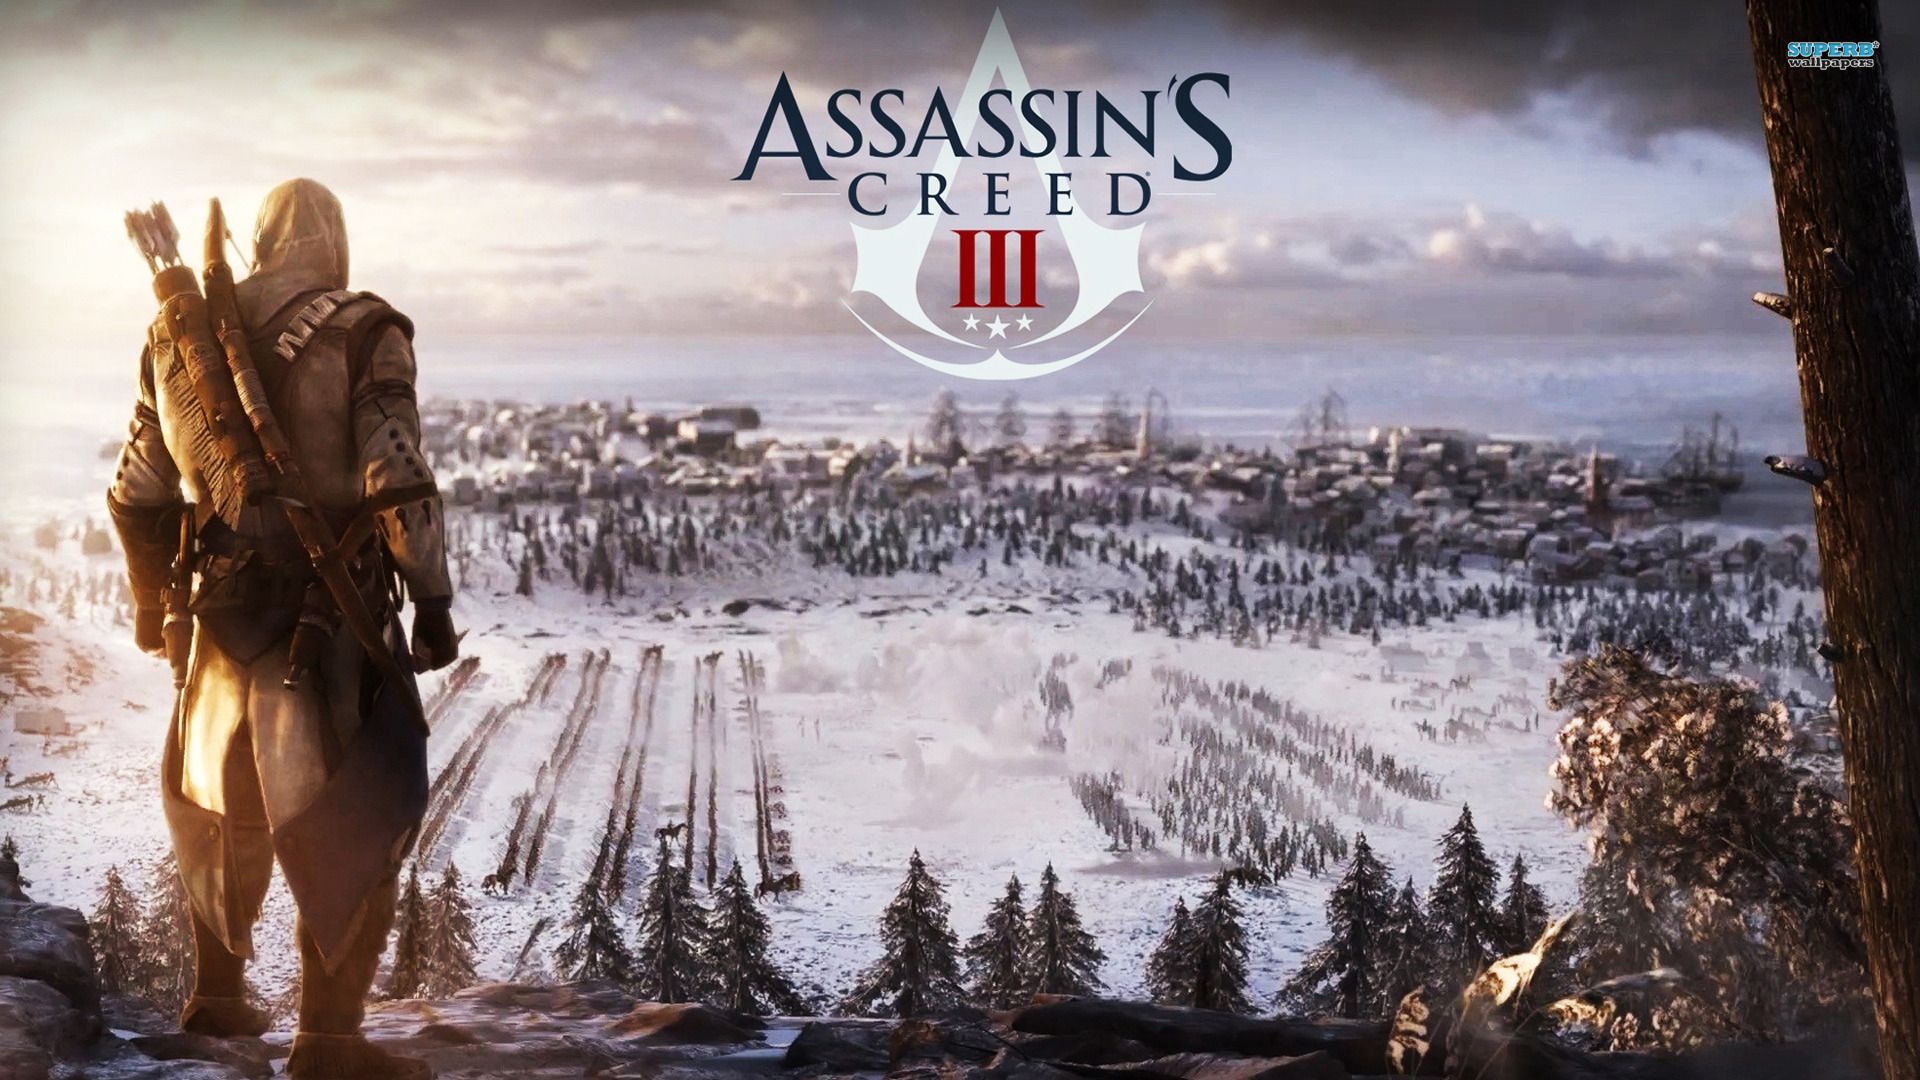 Assassin's Creed III wallpaper - Game wallpapers - #15605